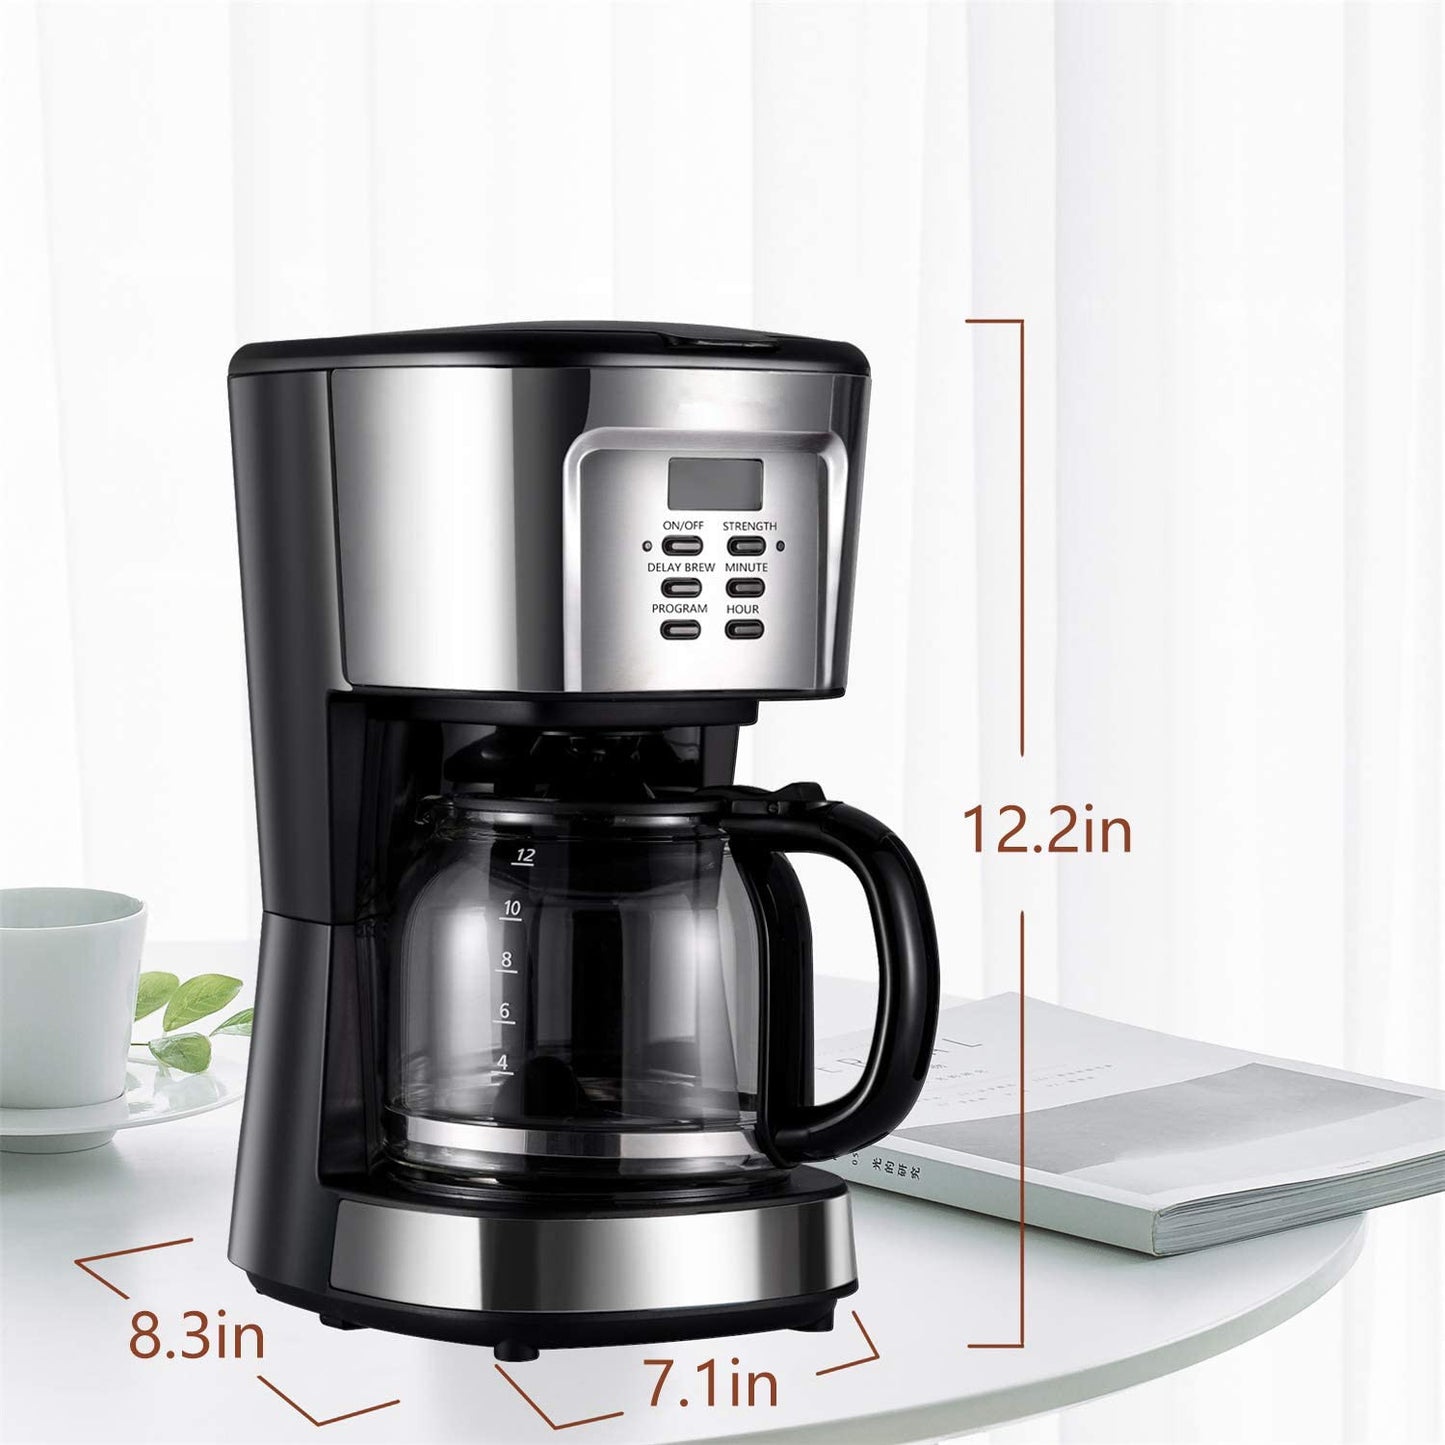 Drip Coffee Machine Drip Coffee Maker Compact Coffee Pot Brewer With Keep Warm And Auto-Shut Off Function